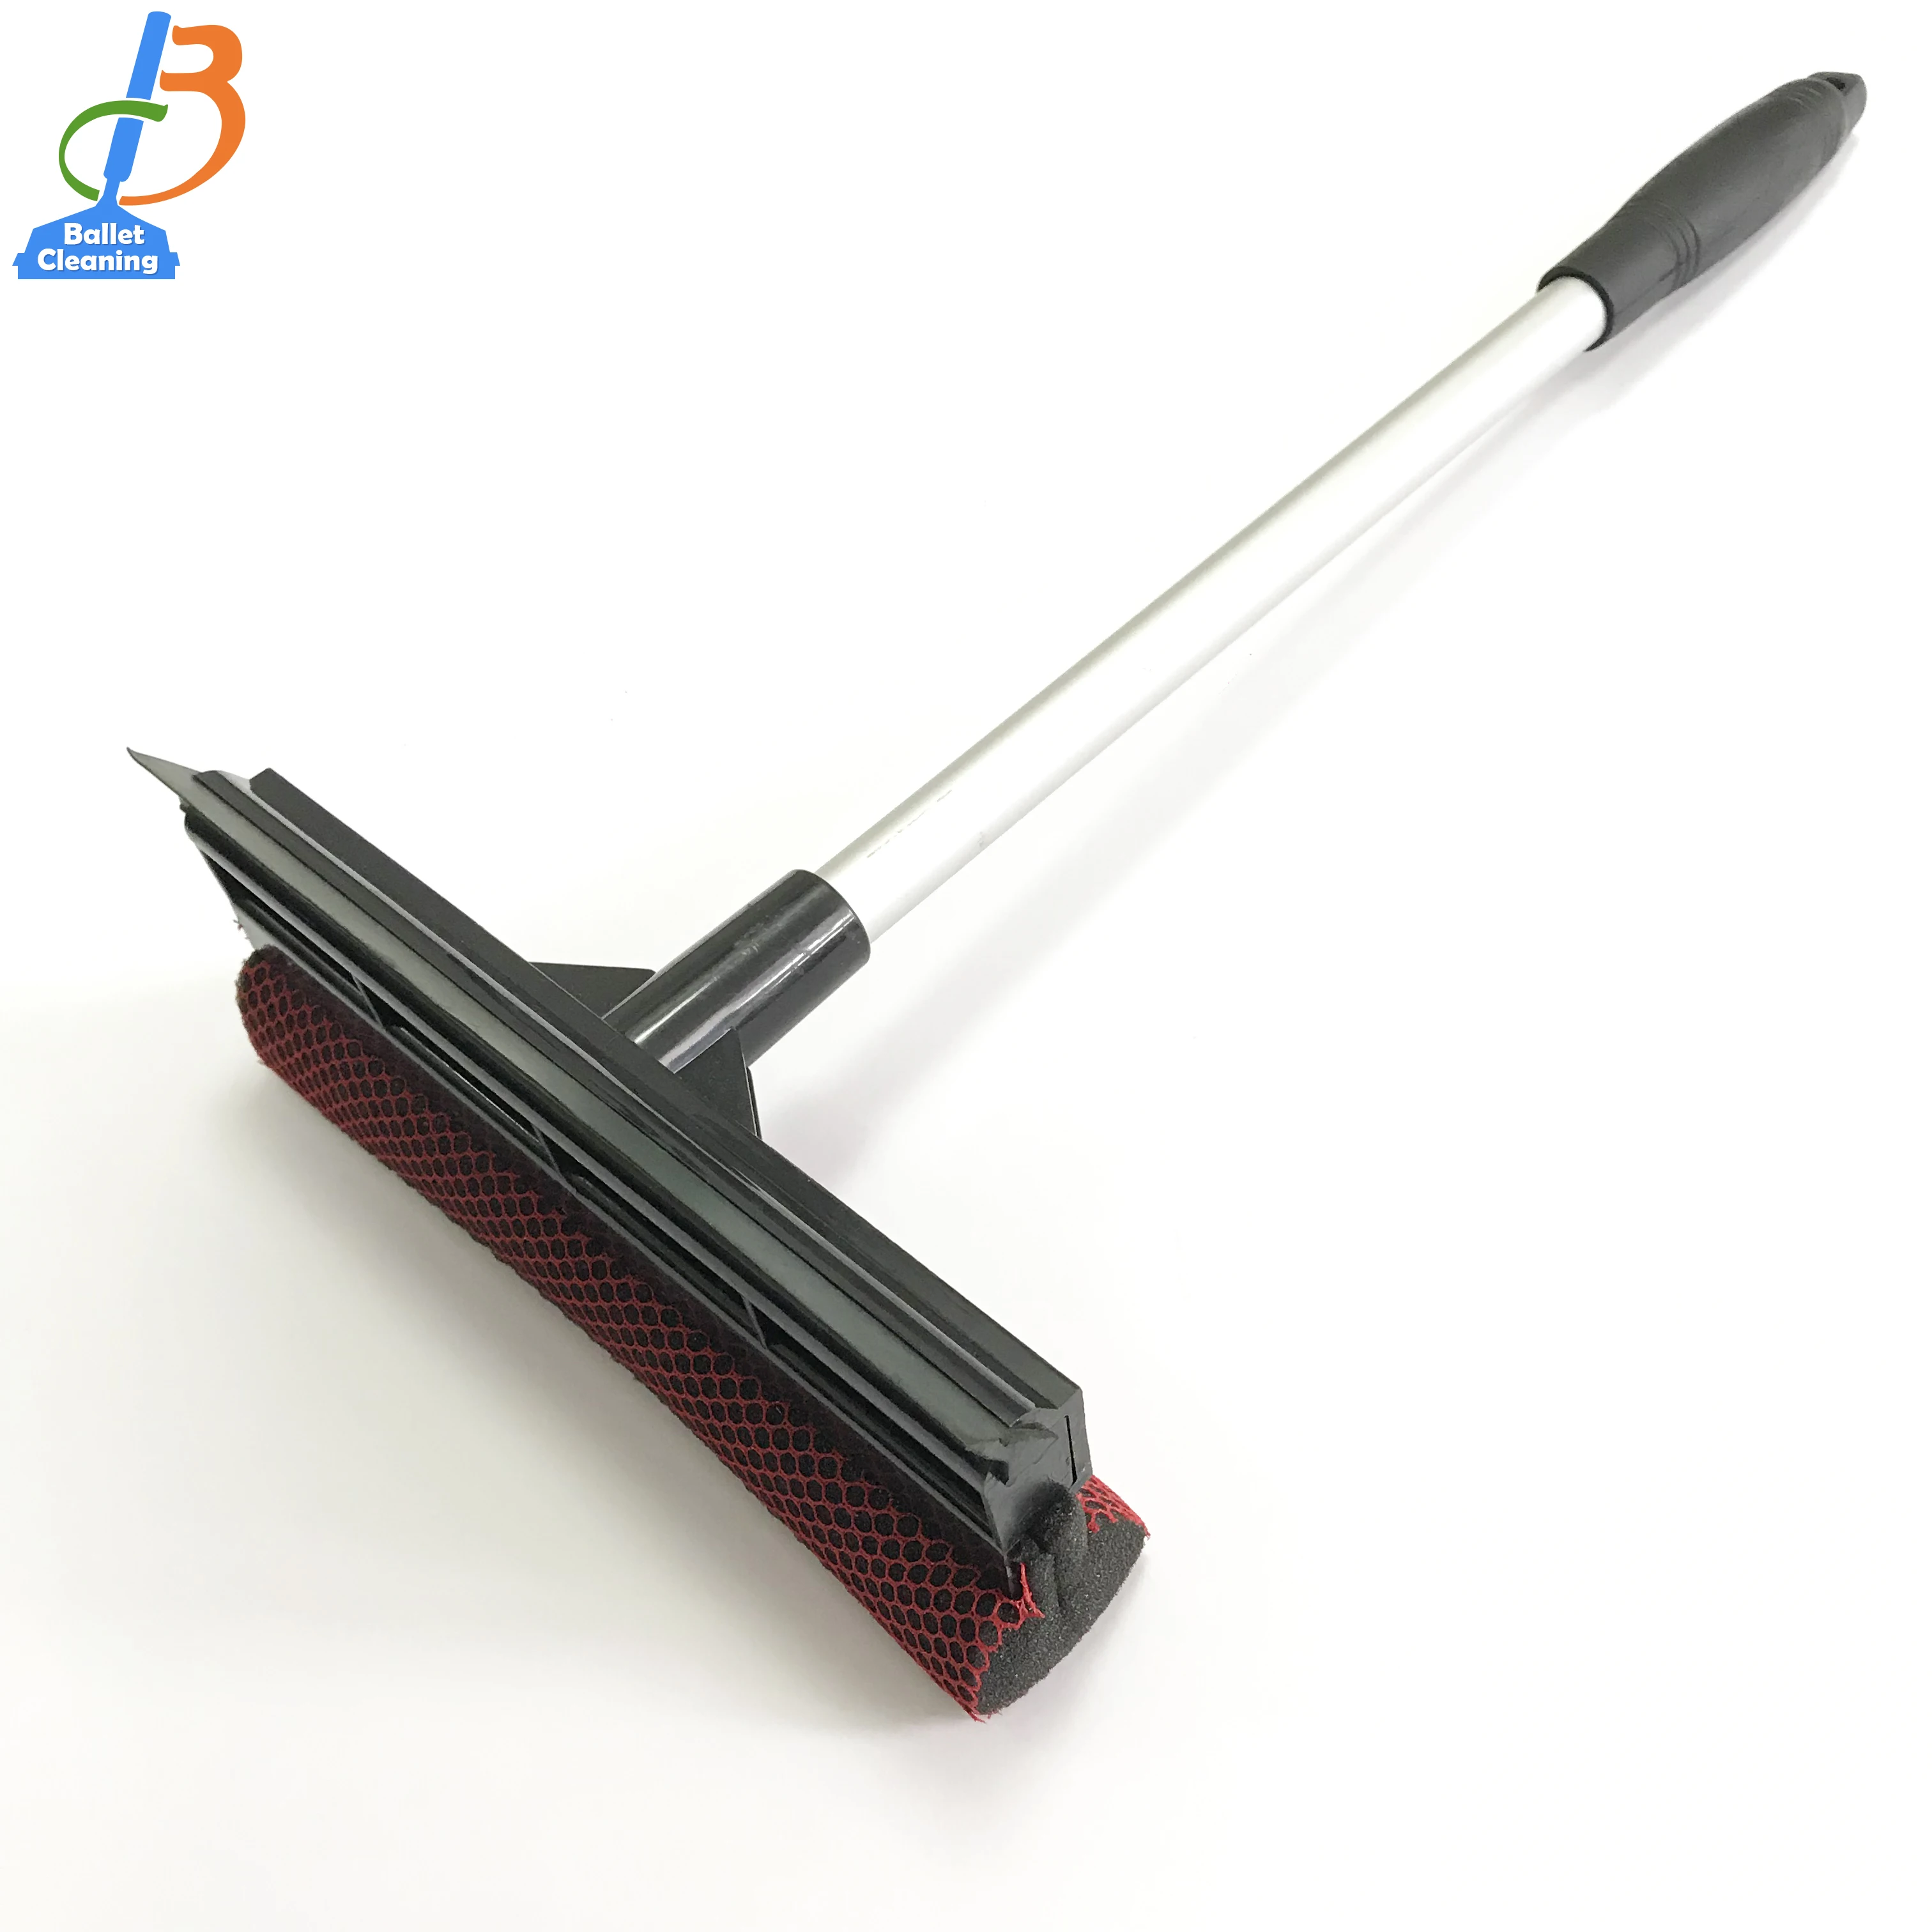 Bathroom Mirror Cleaning Day Supplies Grey Car Squeegee Window Cleaner SUNFRESH Professional Window Squeegee Car Windshield Cleaner Tool with Cleaning Sponge and Rubber Squeegee for Home Car Windows 